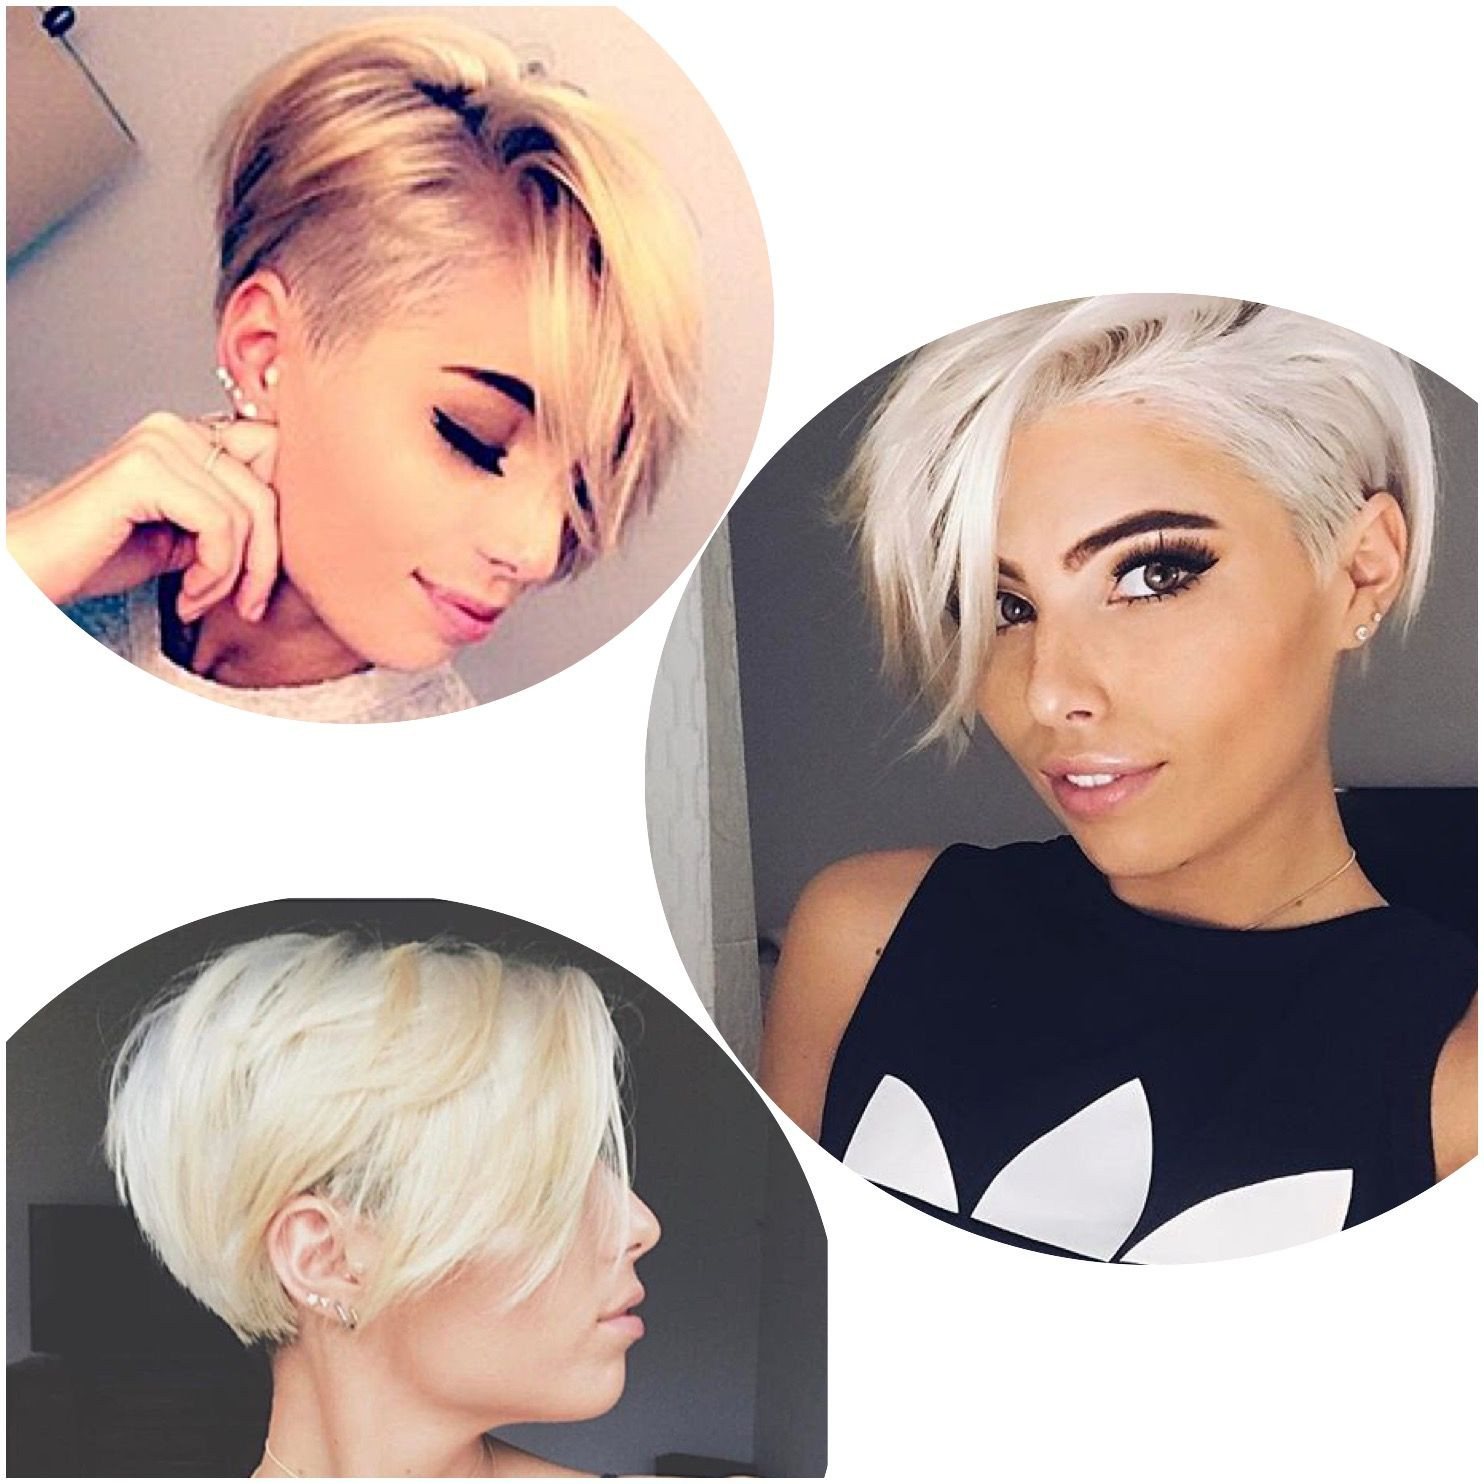 Hairstyles For Growing Out Undercut
 moigibs MAYBE for when I need to grow out my side shave